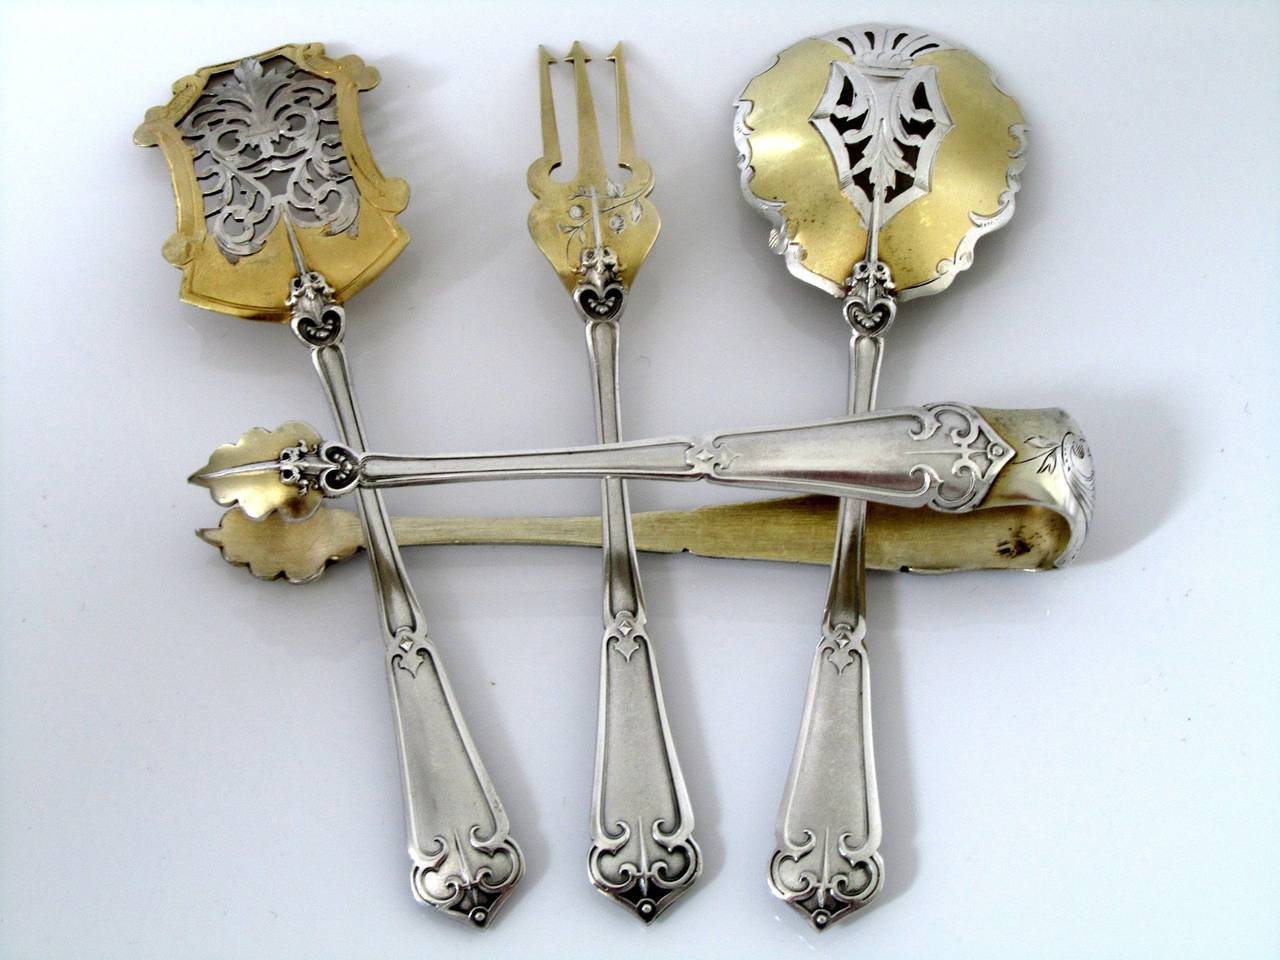 Soufflot French All Sterling Silver Dessert Hors D'oeuvre Set 4 pc w/box Ferrure 1